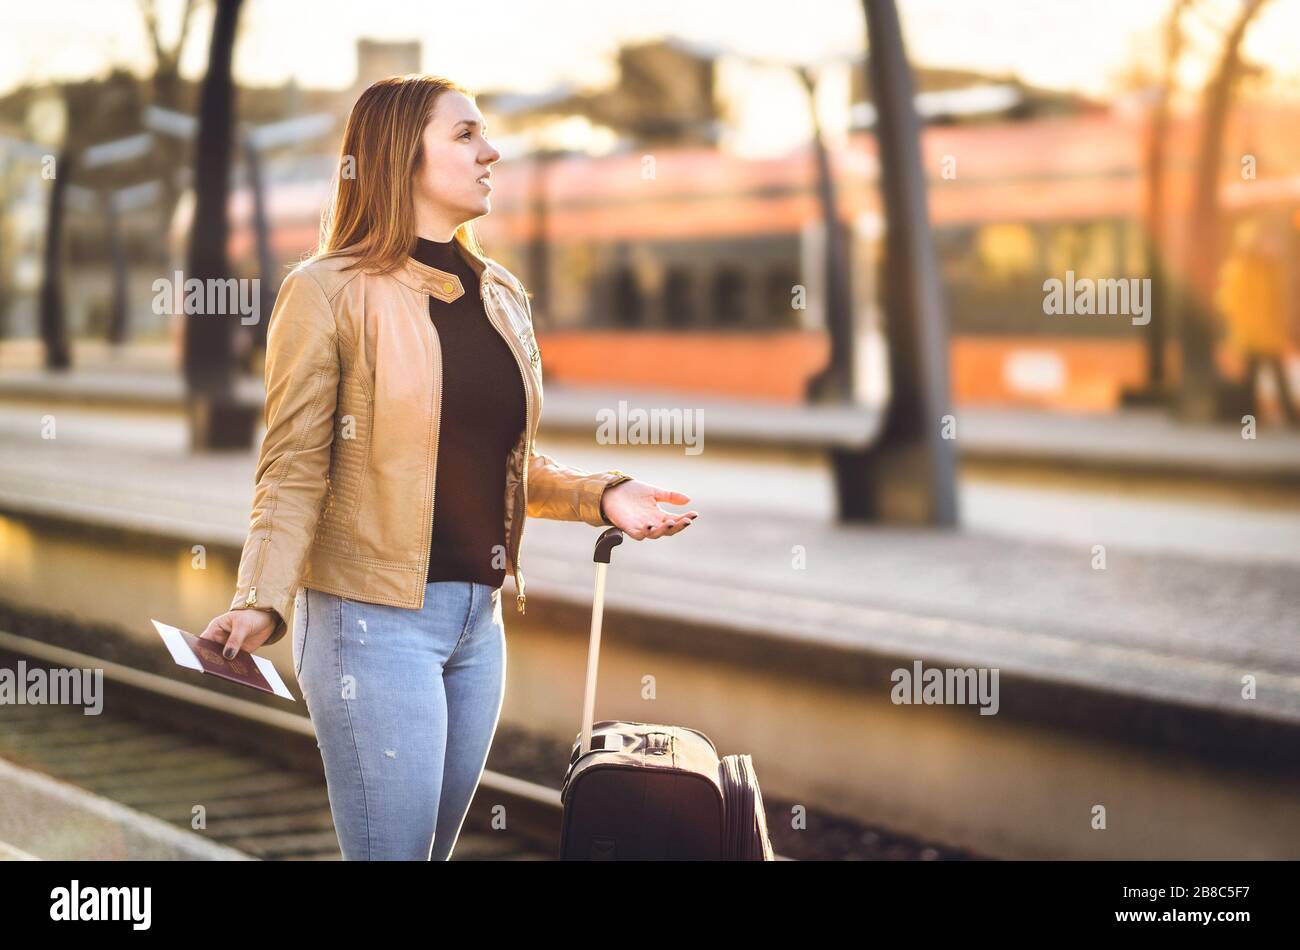 Frustrated woman at train station. Late, delayed, canceled or behind schedule. Unhappy and sad passenger lost in wrong platform. Stock Photo